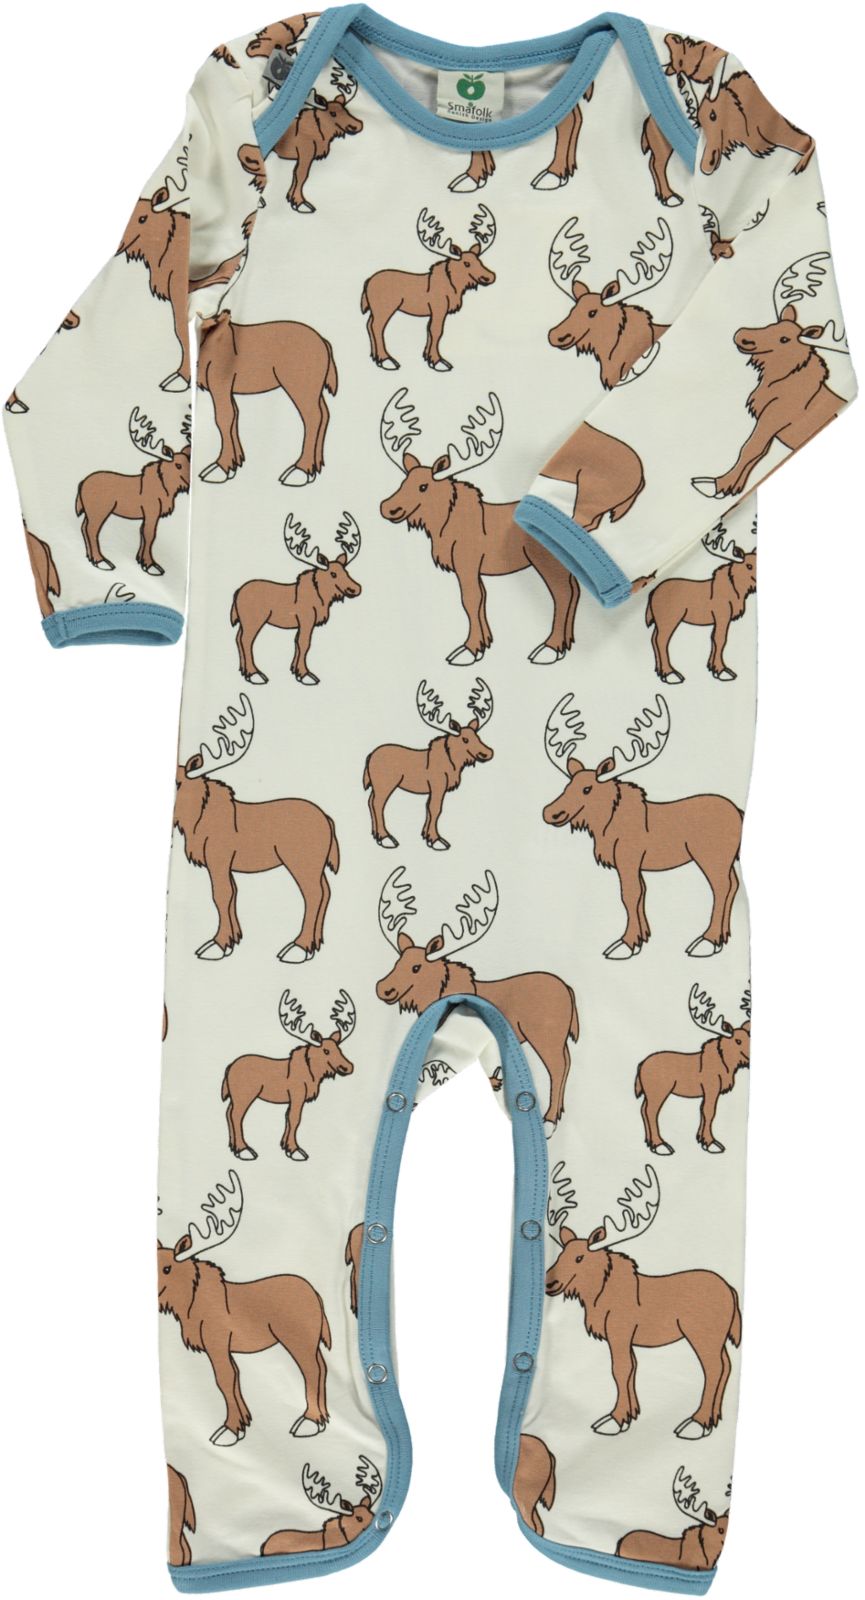 Long-sleeved baby suit with moose